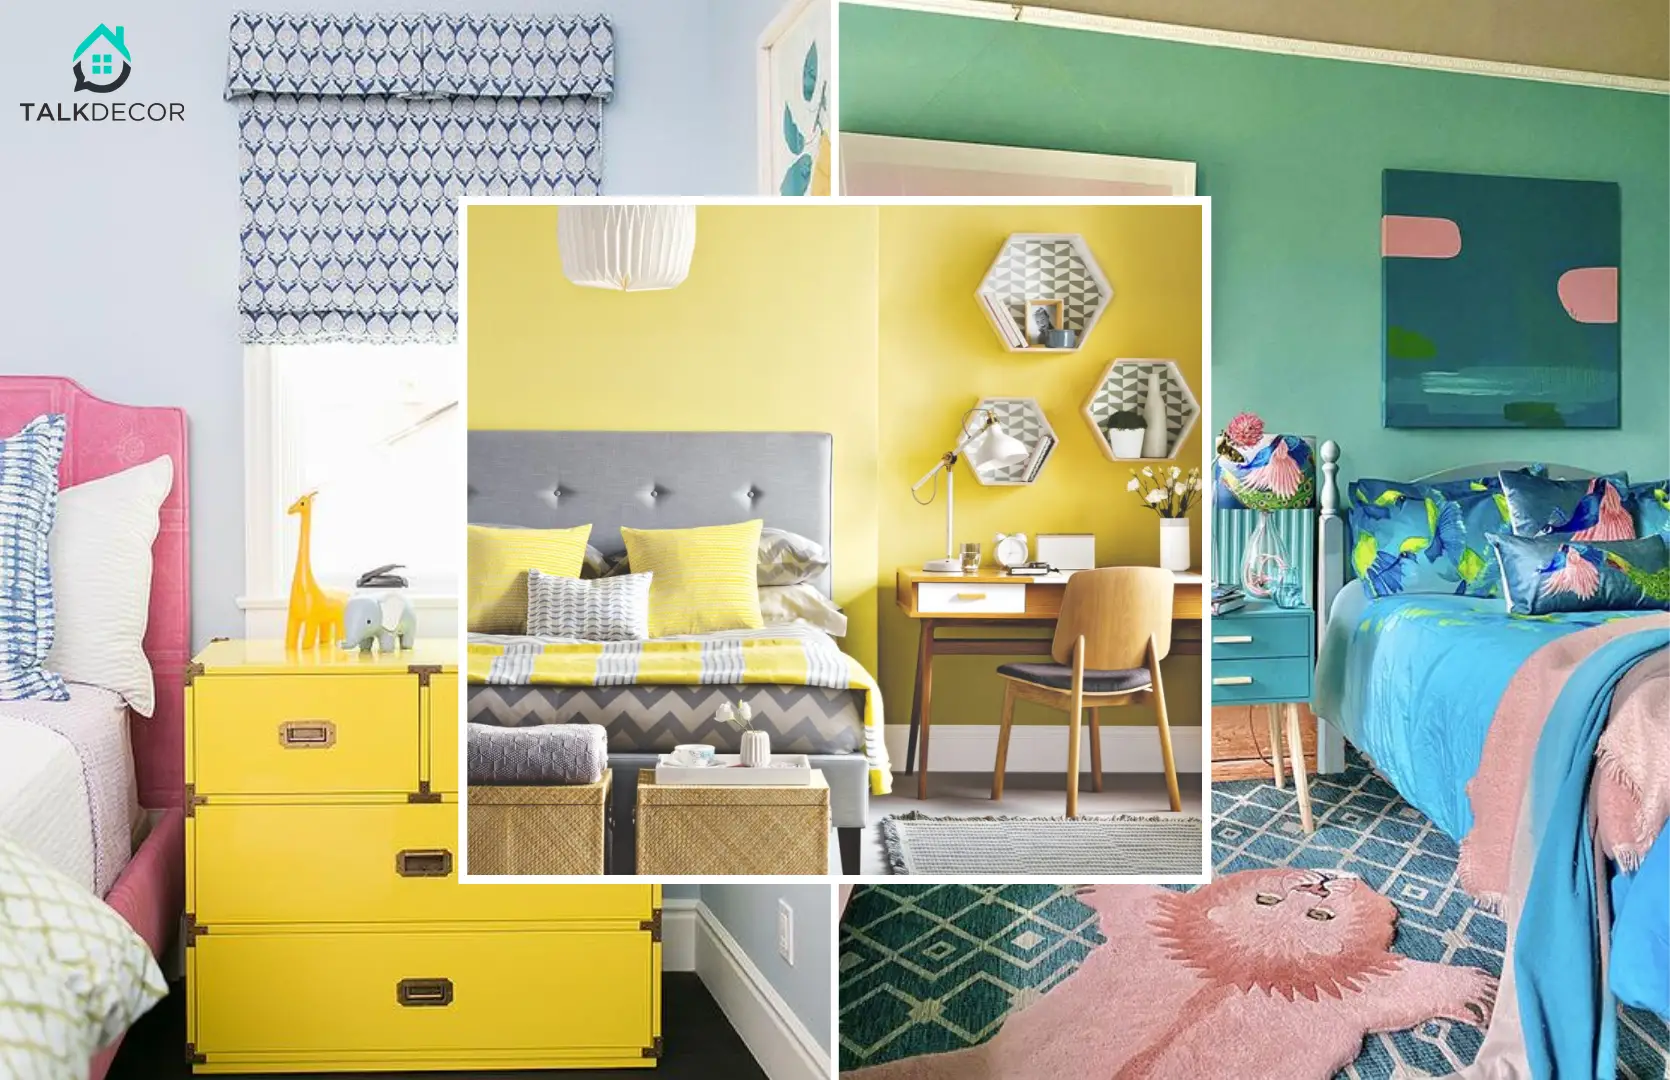 From Elegant to Cheerful: 10 Brilliant Bedroom Color Scheme Ideas